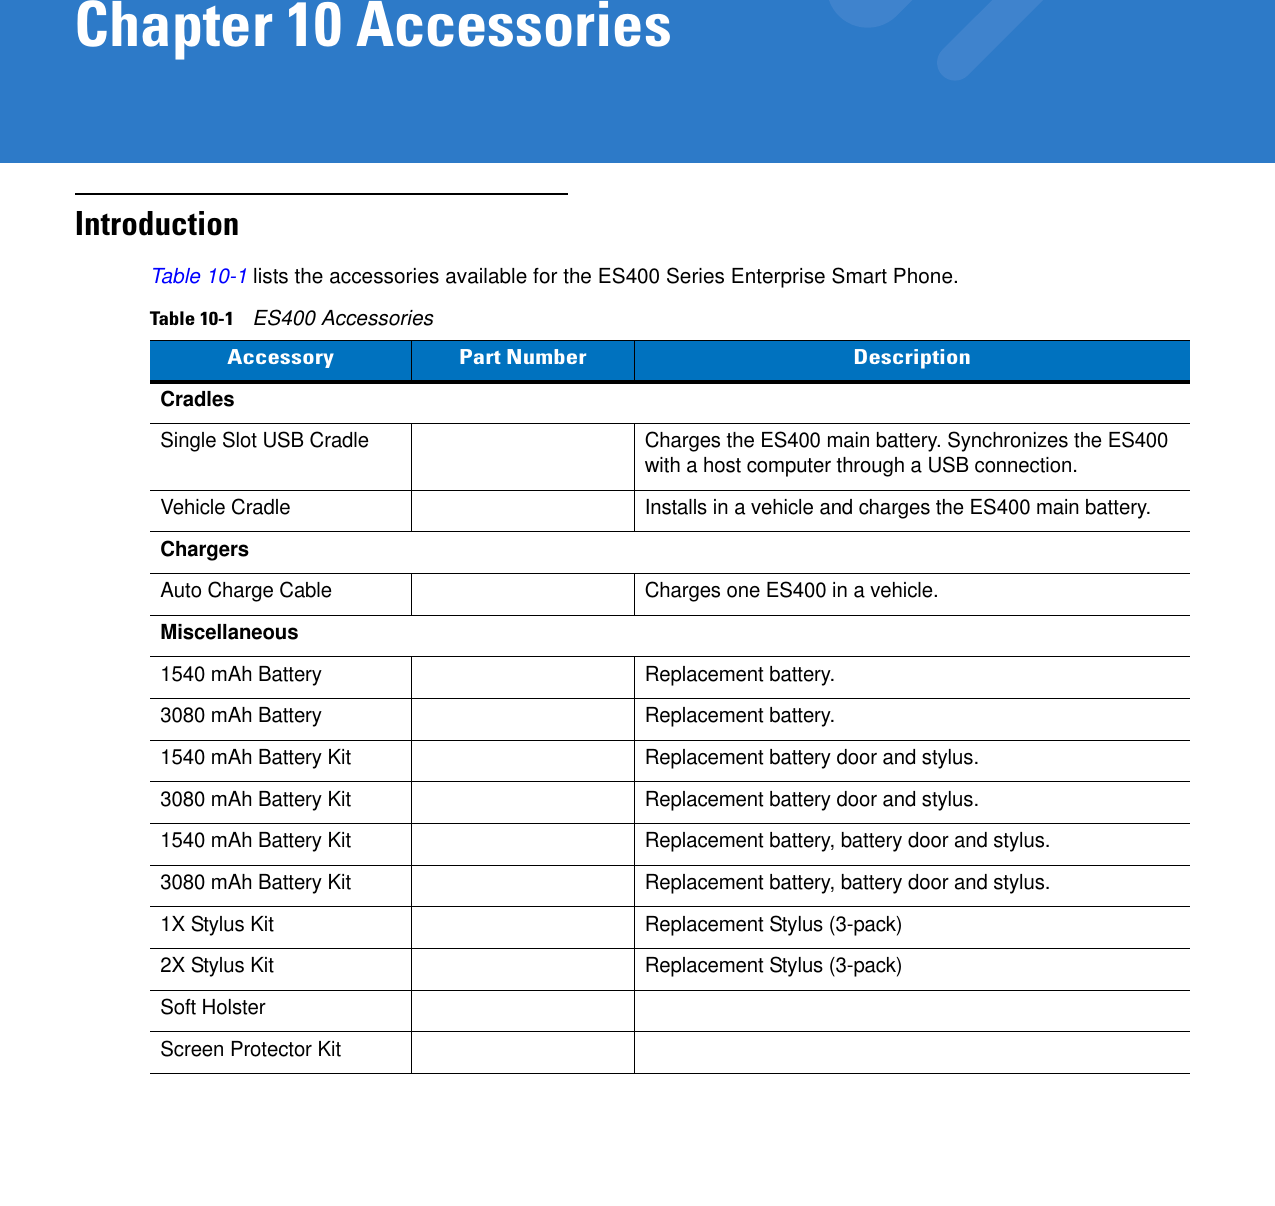 Chapter 10 AccessoriesIntroductionTable 10-1 lists the accessories available for the ES400 Series Enterprise Smart Phone.Table 10-1    ES400 AccessoriesAccessory Part Number DescriptionCradlesSingle Slot USB Cradle Charges the ES400 main battery. Synchronizes the ES400 with a host computer through a USB connection.Vehicle Cradle Installs in a vehicle and charges the ES400 main battery.ChargersAuto Charge Cable Charges one ES400 in a vehicle.Miscellaneous1540 mAh Battery Replacement battery.3080 mAh Battery Replacement battery.1540 mAh Battery Kit Replacement battery door and stylus.3080 mAh Battery Kit Replacement battery door and stylus.1540 mAh Battery Kit Replacement battery, battery door and stylus.3080 mAh Battery Kit Replacement battery, battery door and stylus.1X Stylus Kit Replacement Stylus (3-pack)2X Stylus Kit Replacement Stylus (3-pack)Soft HolsterScreen Protector Kit